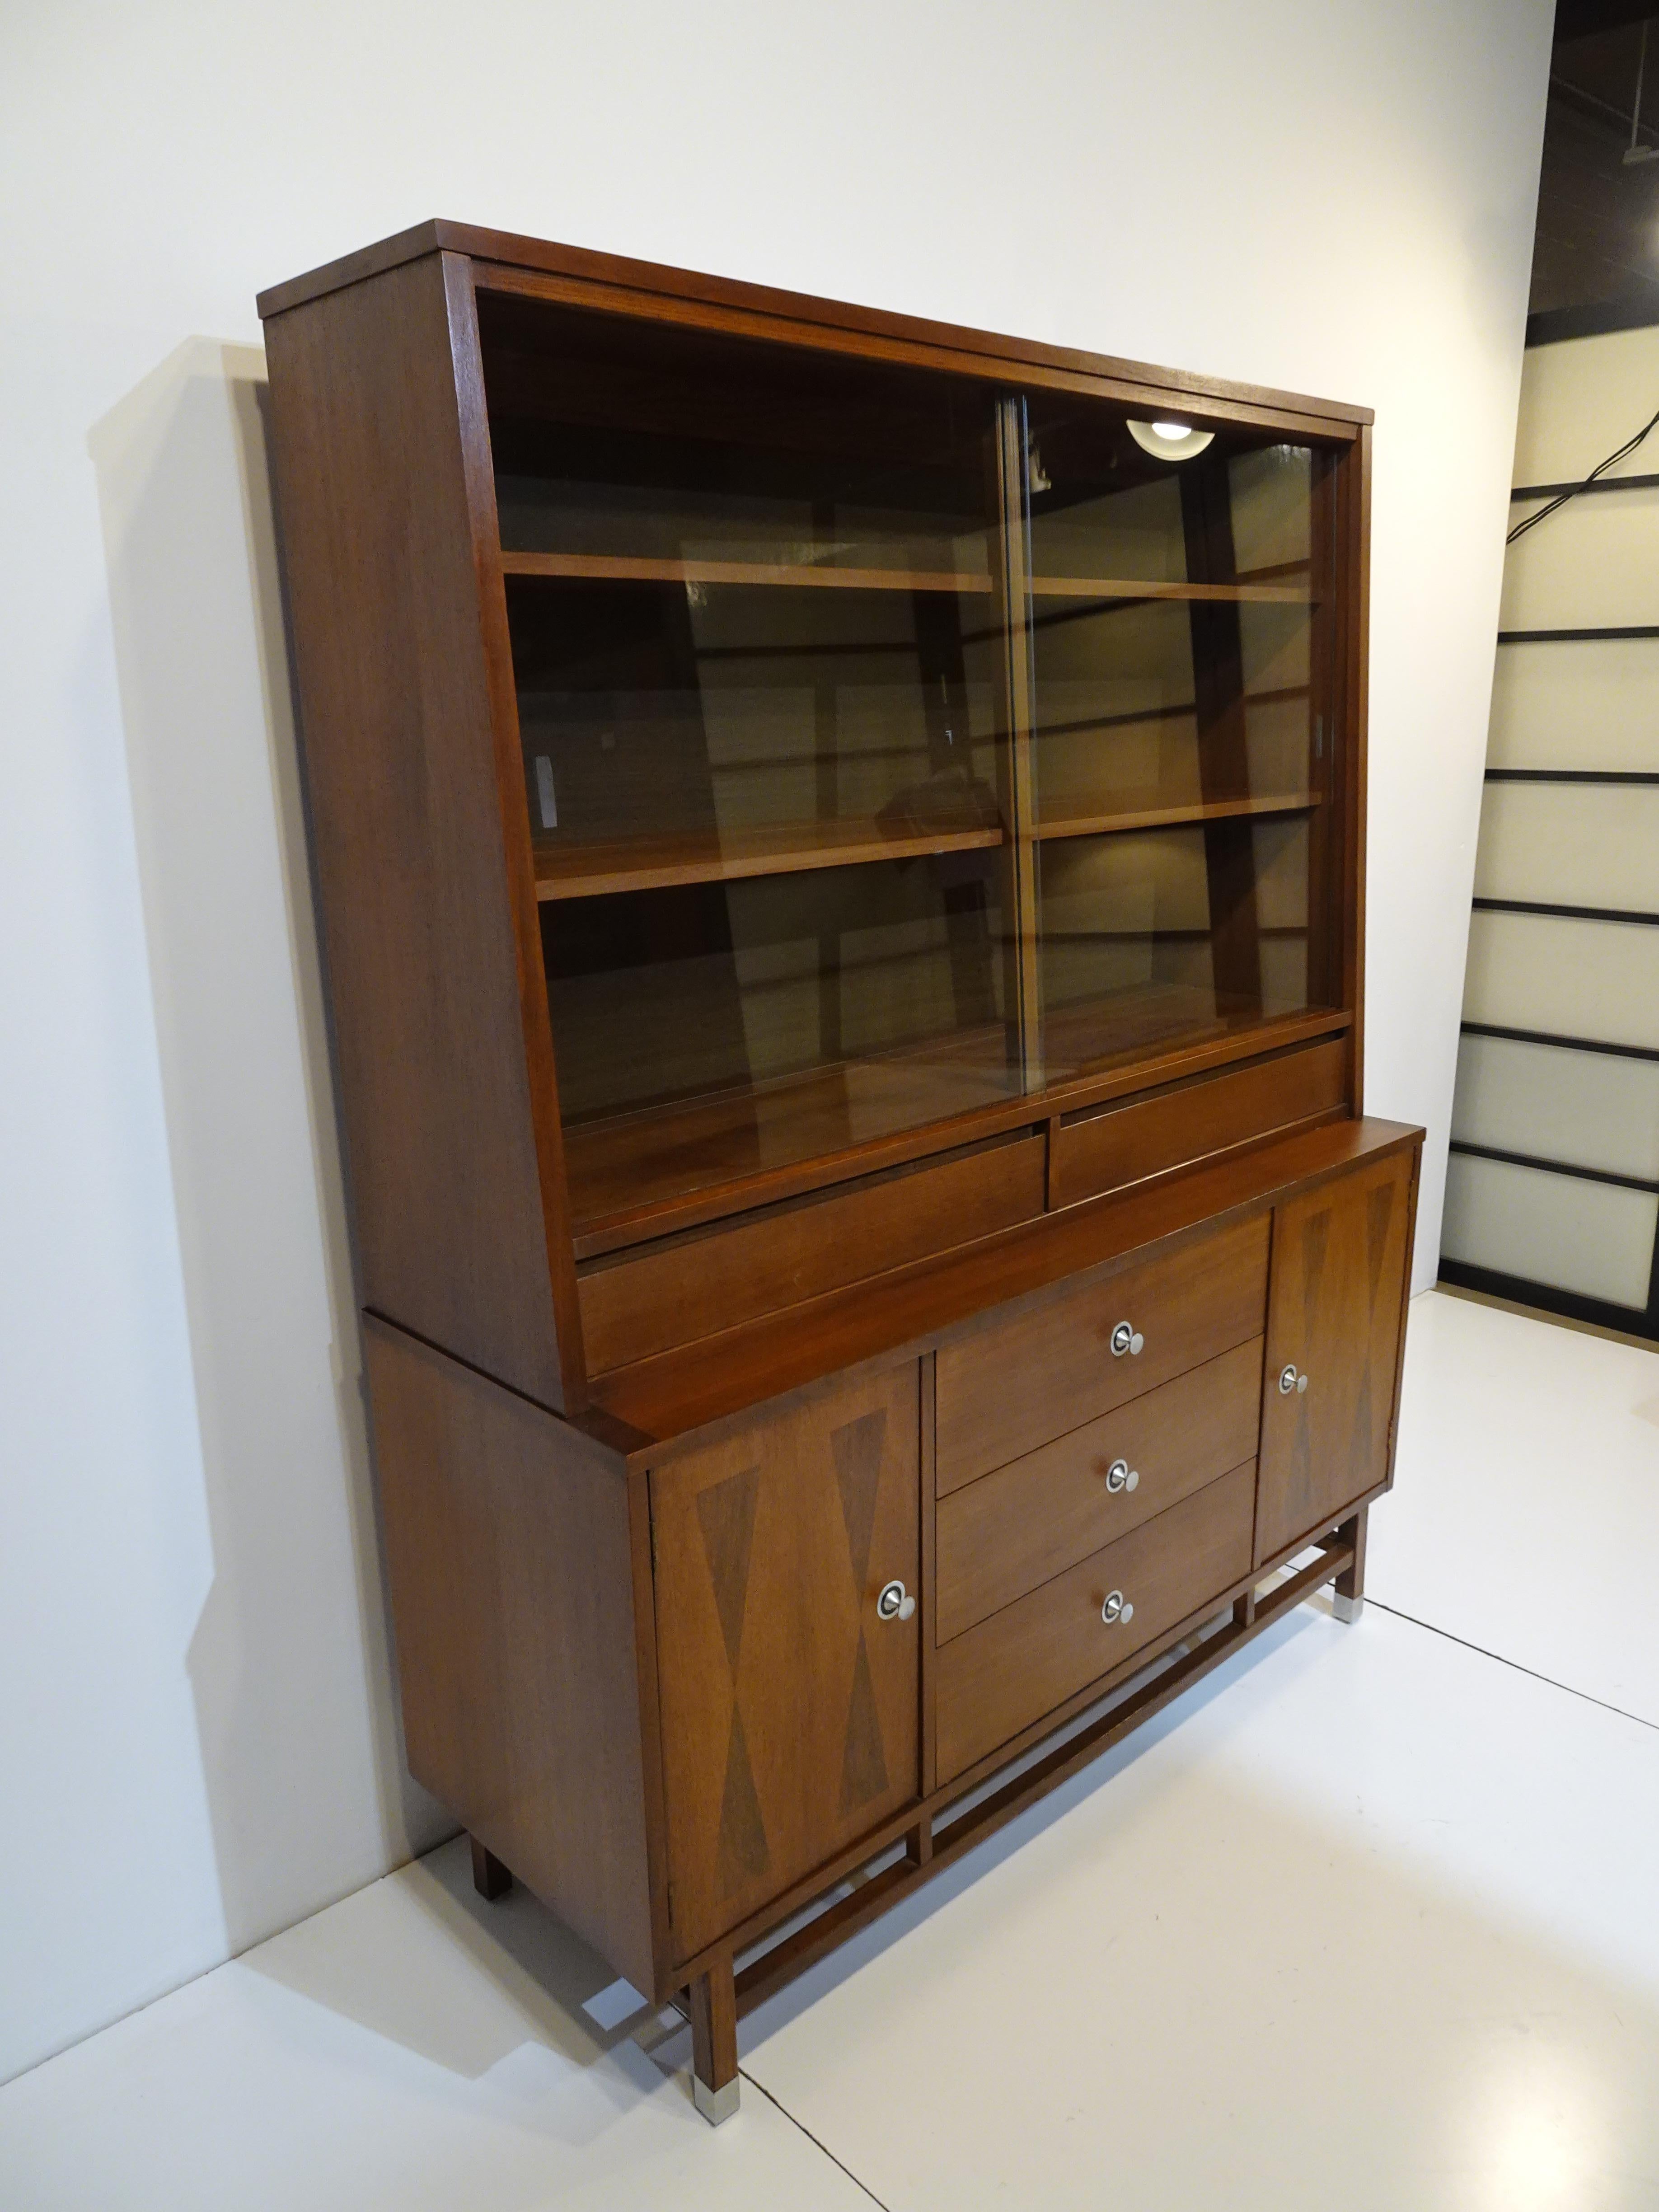 A well crafted dark walnut hutch / bookcase / china cabinet with rosewood detailed door fronts and turned aluminum pulls. The upper case has two non adjustable shelves and sliding glass doors the lower cabinet has three drawers and two door to each